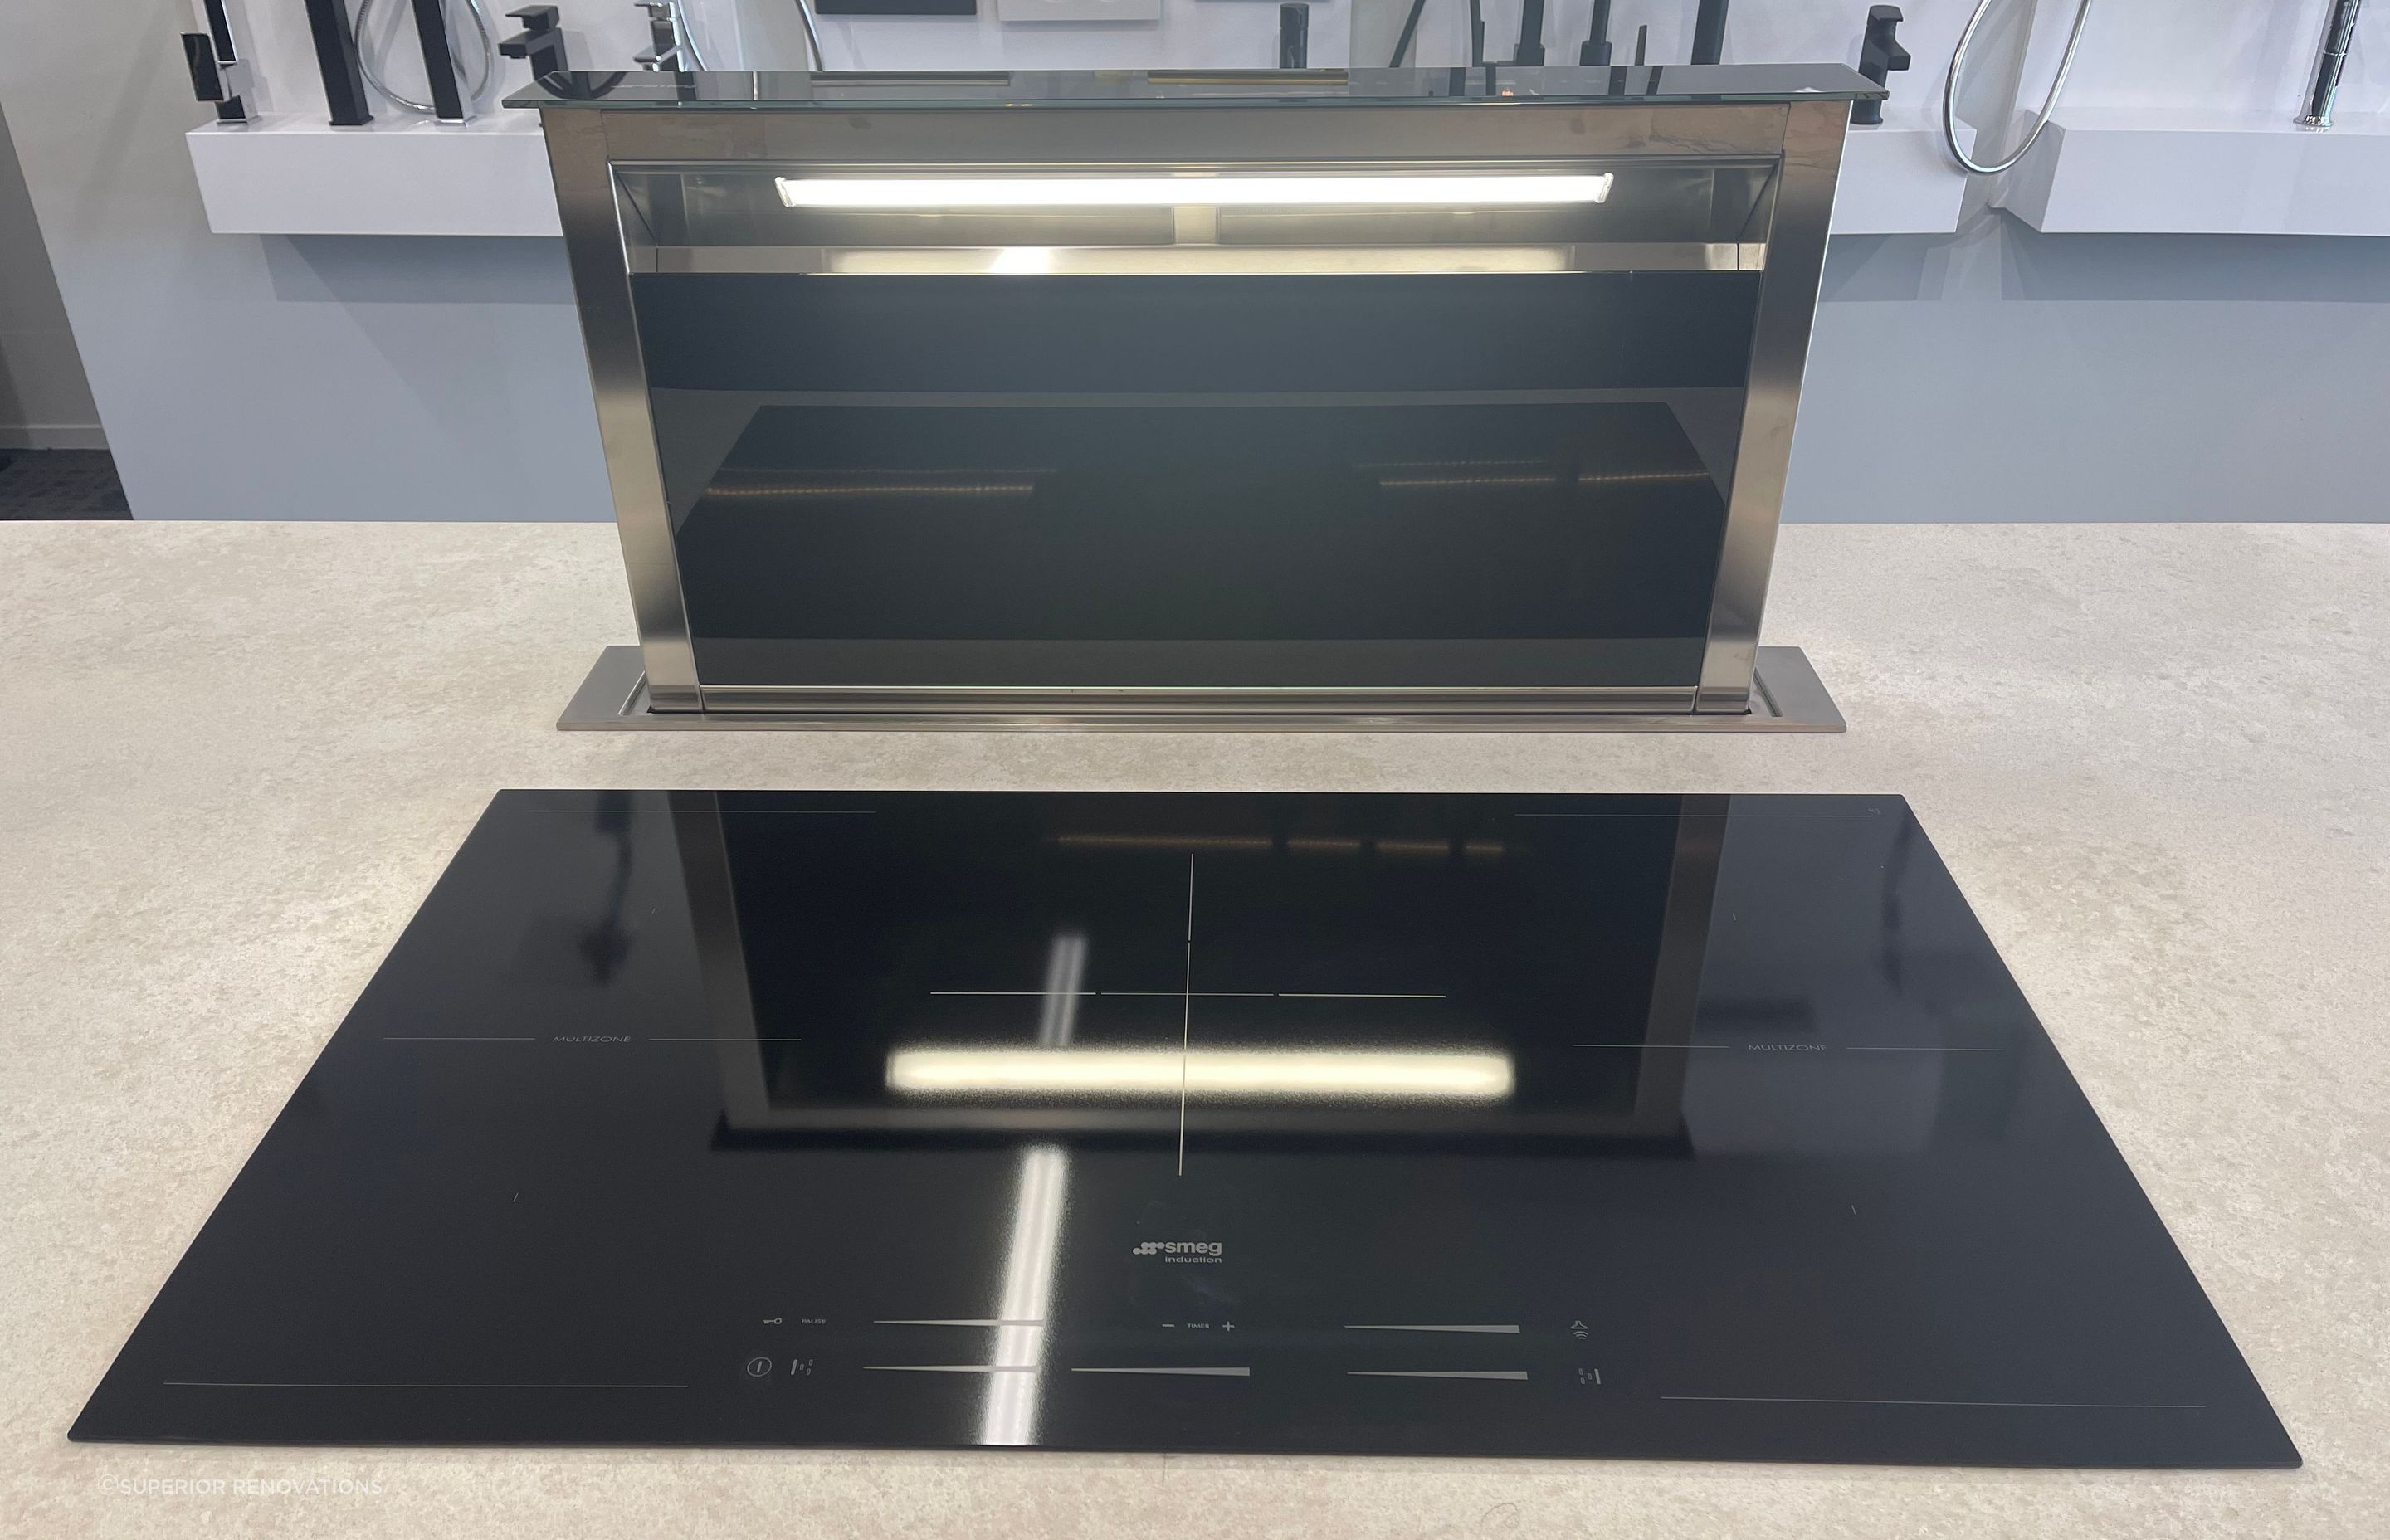 When you need to use the downdraft range hood, you simply press a button and it comes up.